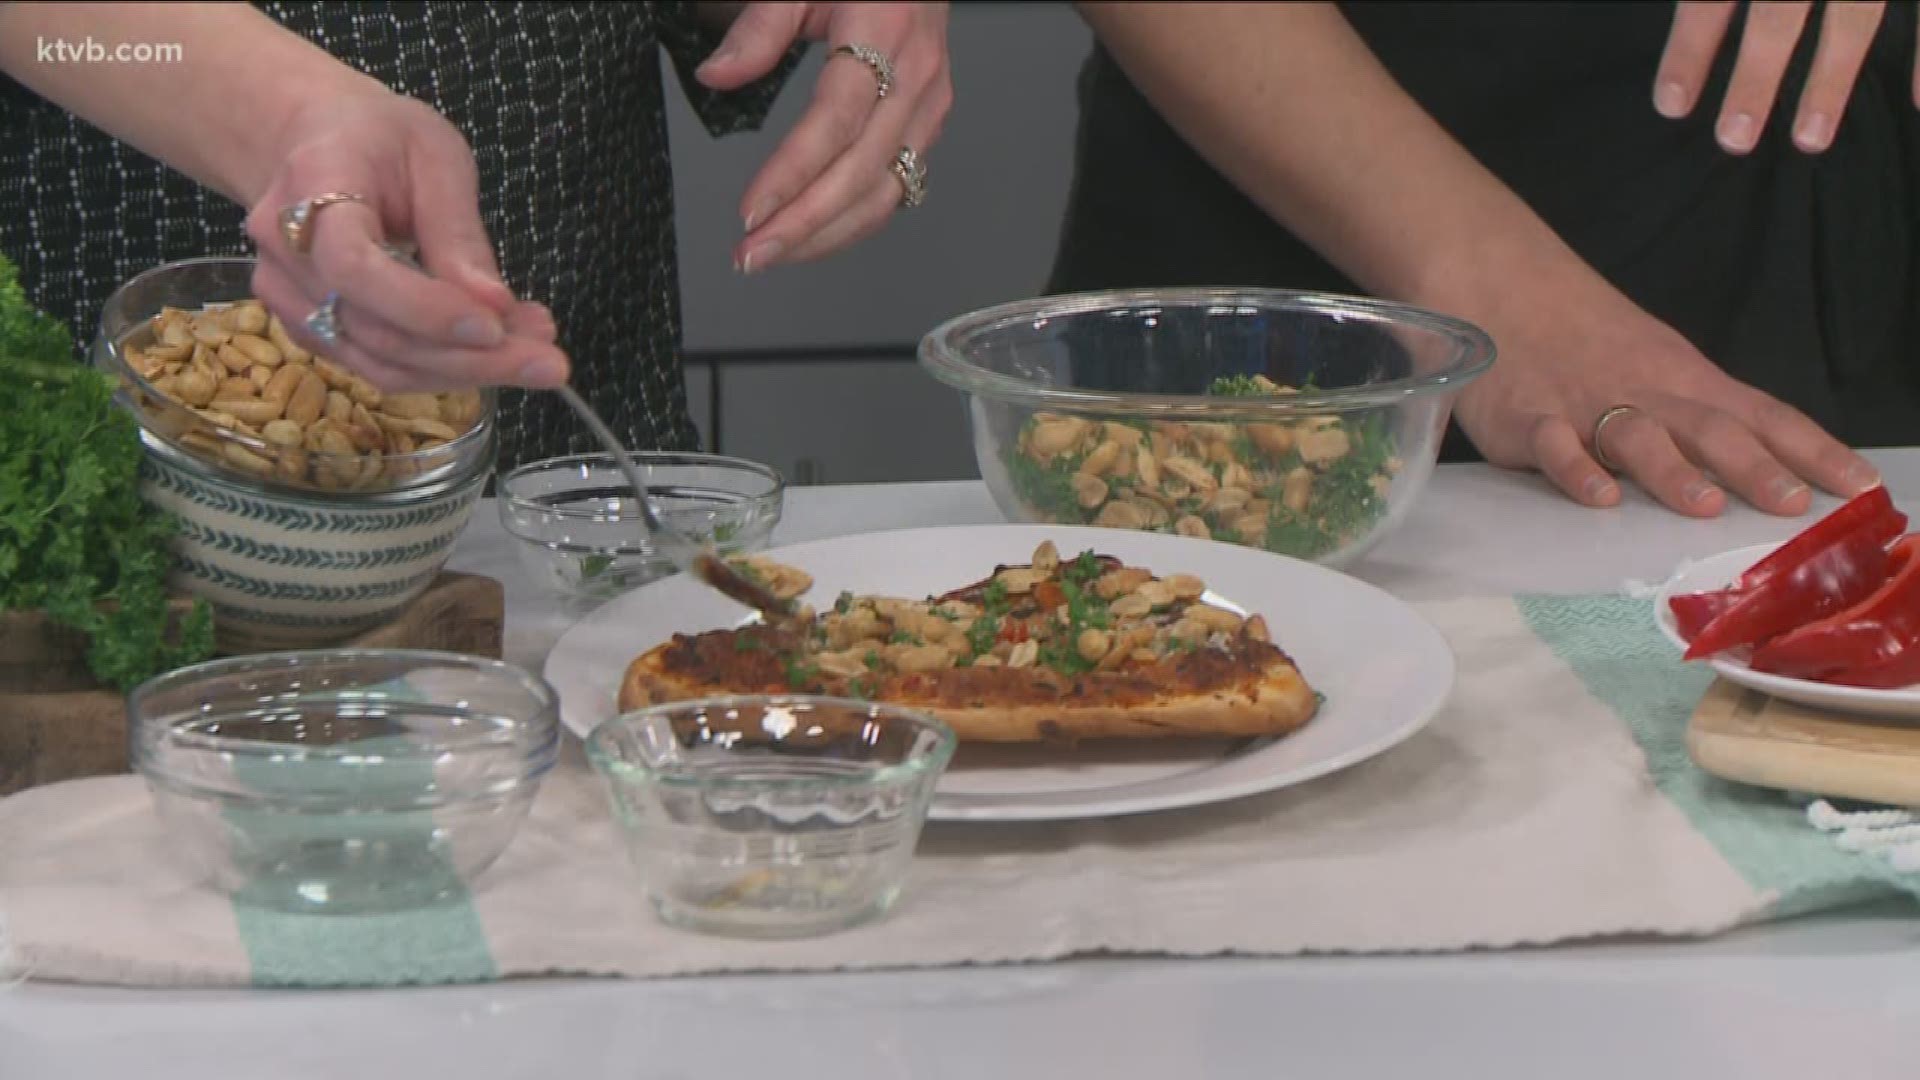 Registered dietitian Molly Tevis shows us how to make these two healthy recipes.